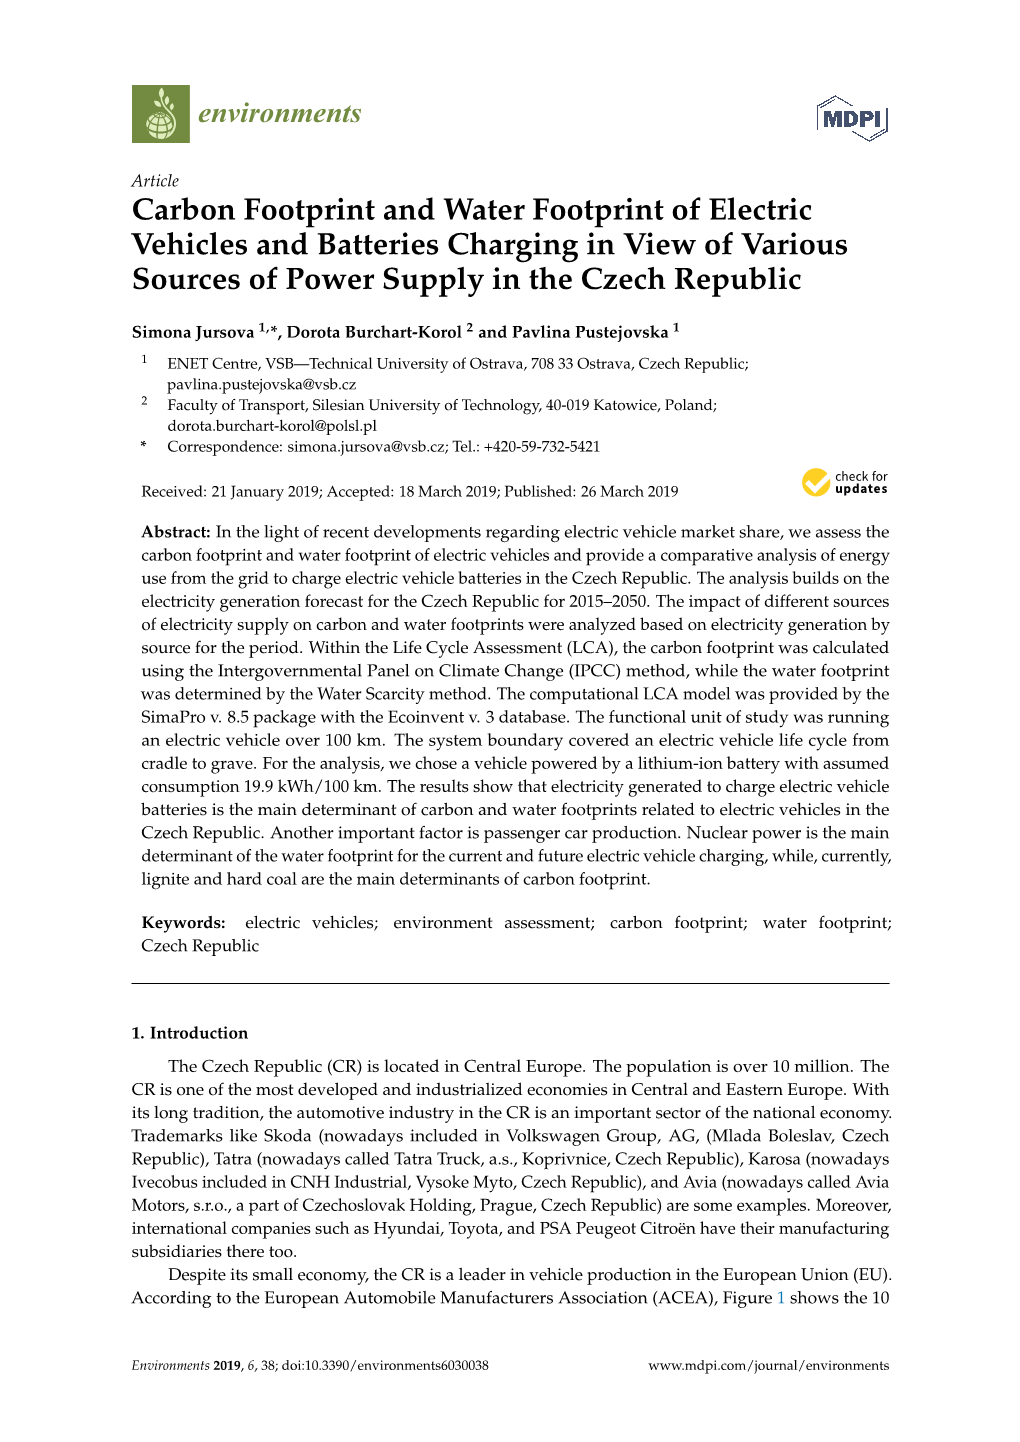 Carbon Footprint and Water Footprint of Electric Vehicles and Batteries Charging in View of Various Sources of Power Supply in the Czech Republic